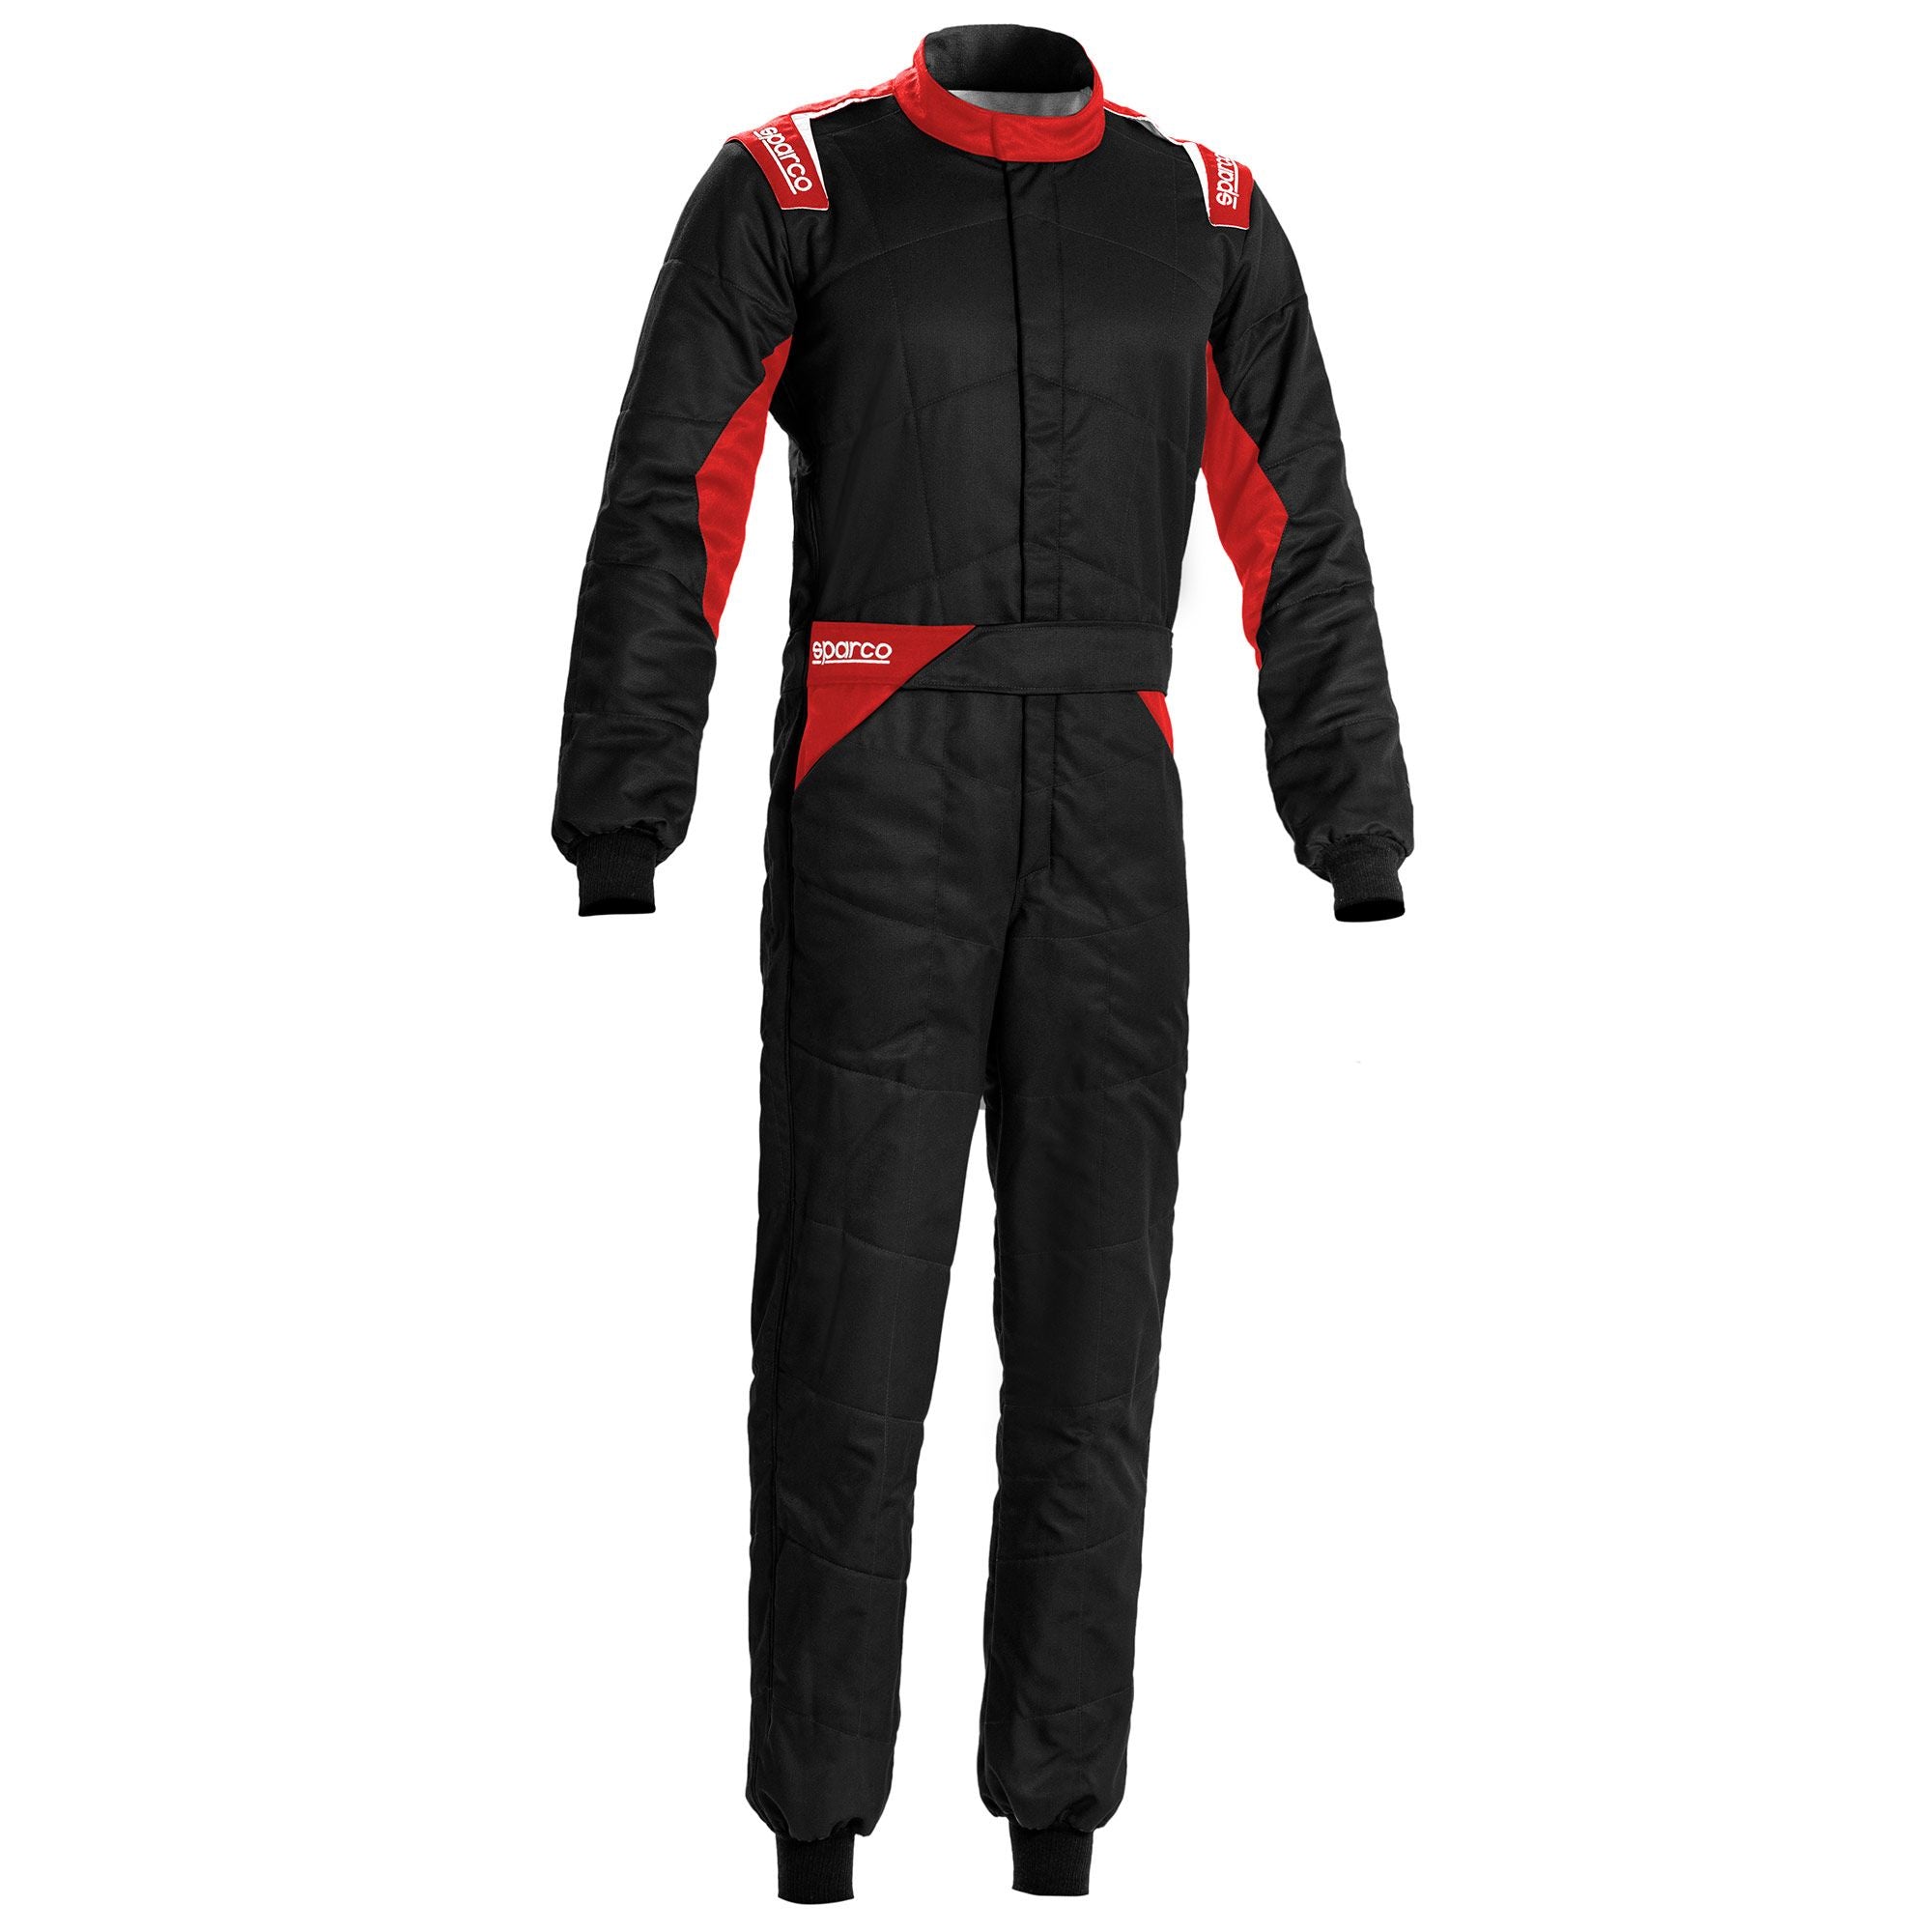 SPARCO 00109360NRRS SPRINT 2022 Racing suit, FIA 8856-2018, black/red, size 60 Photo-0 